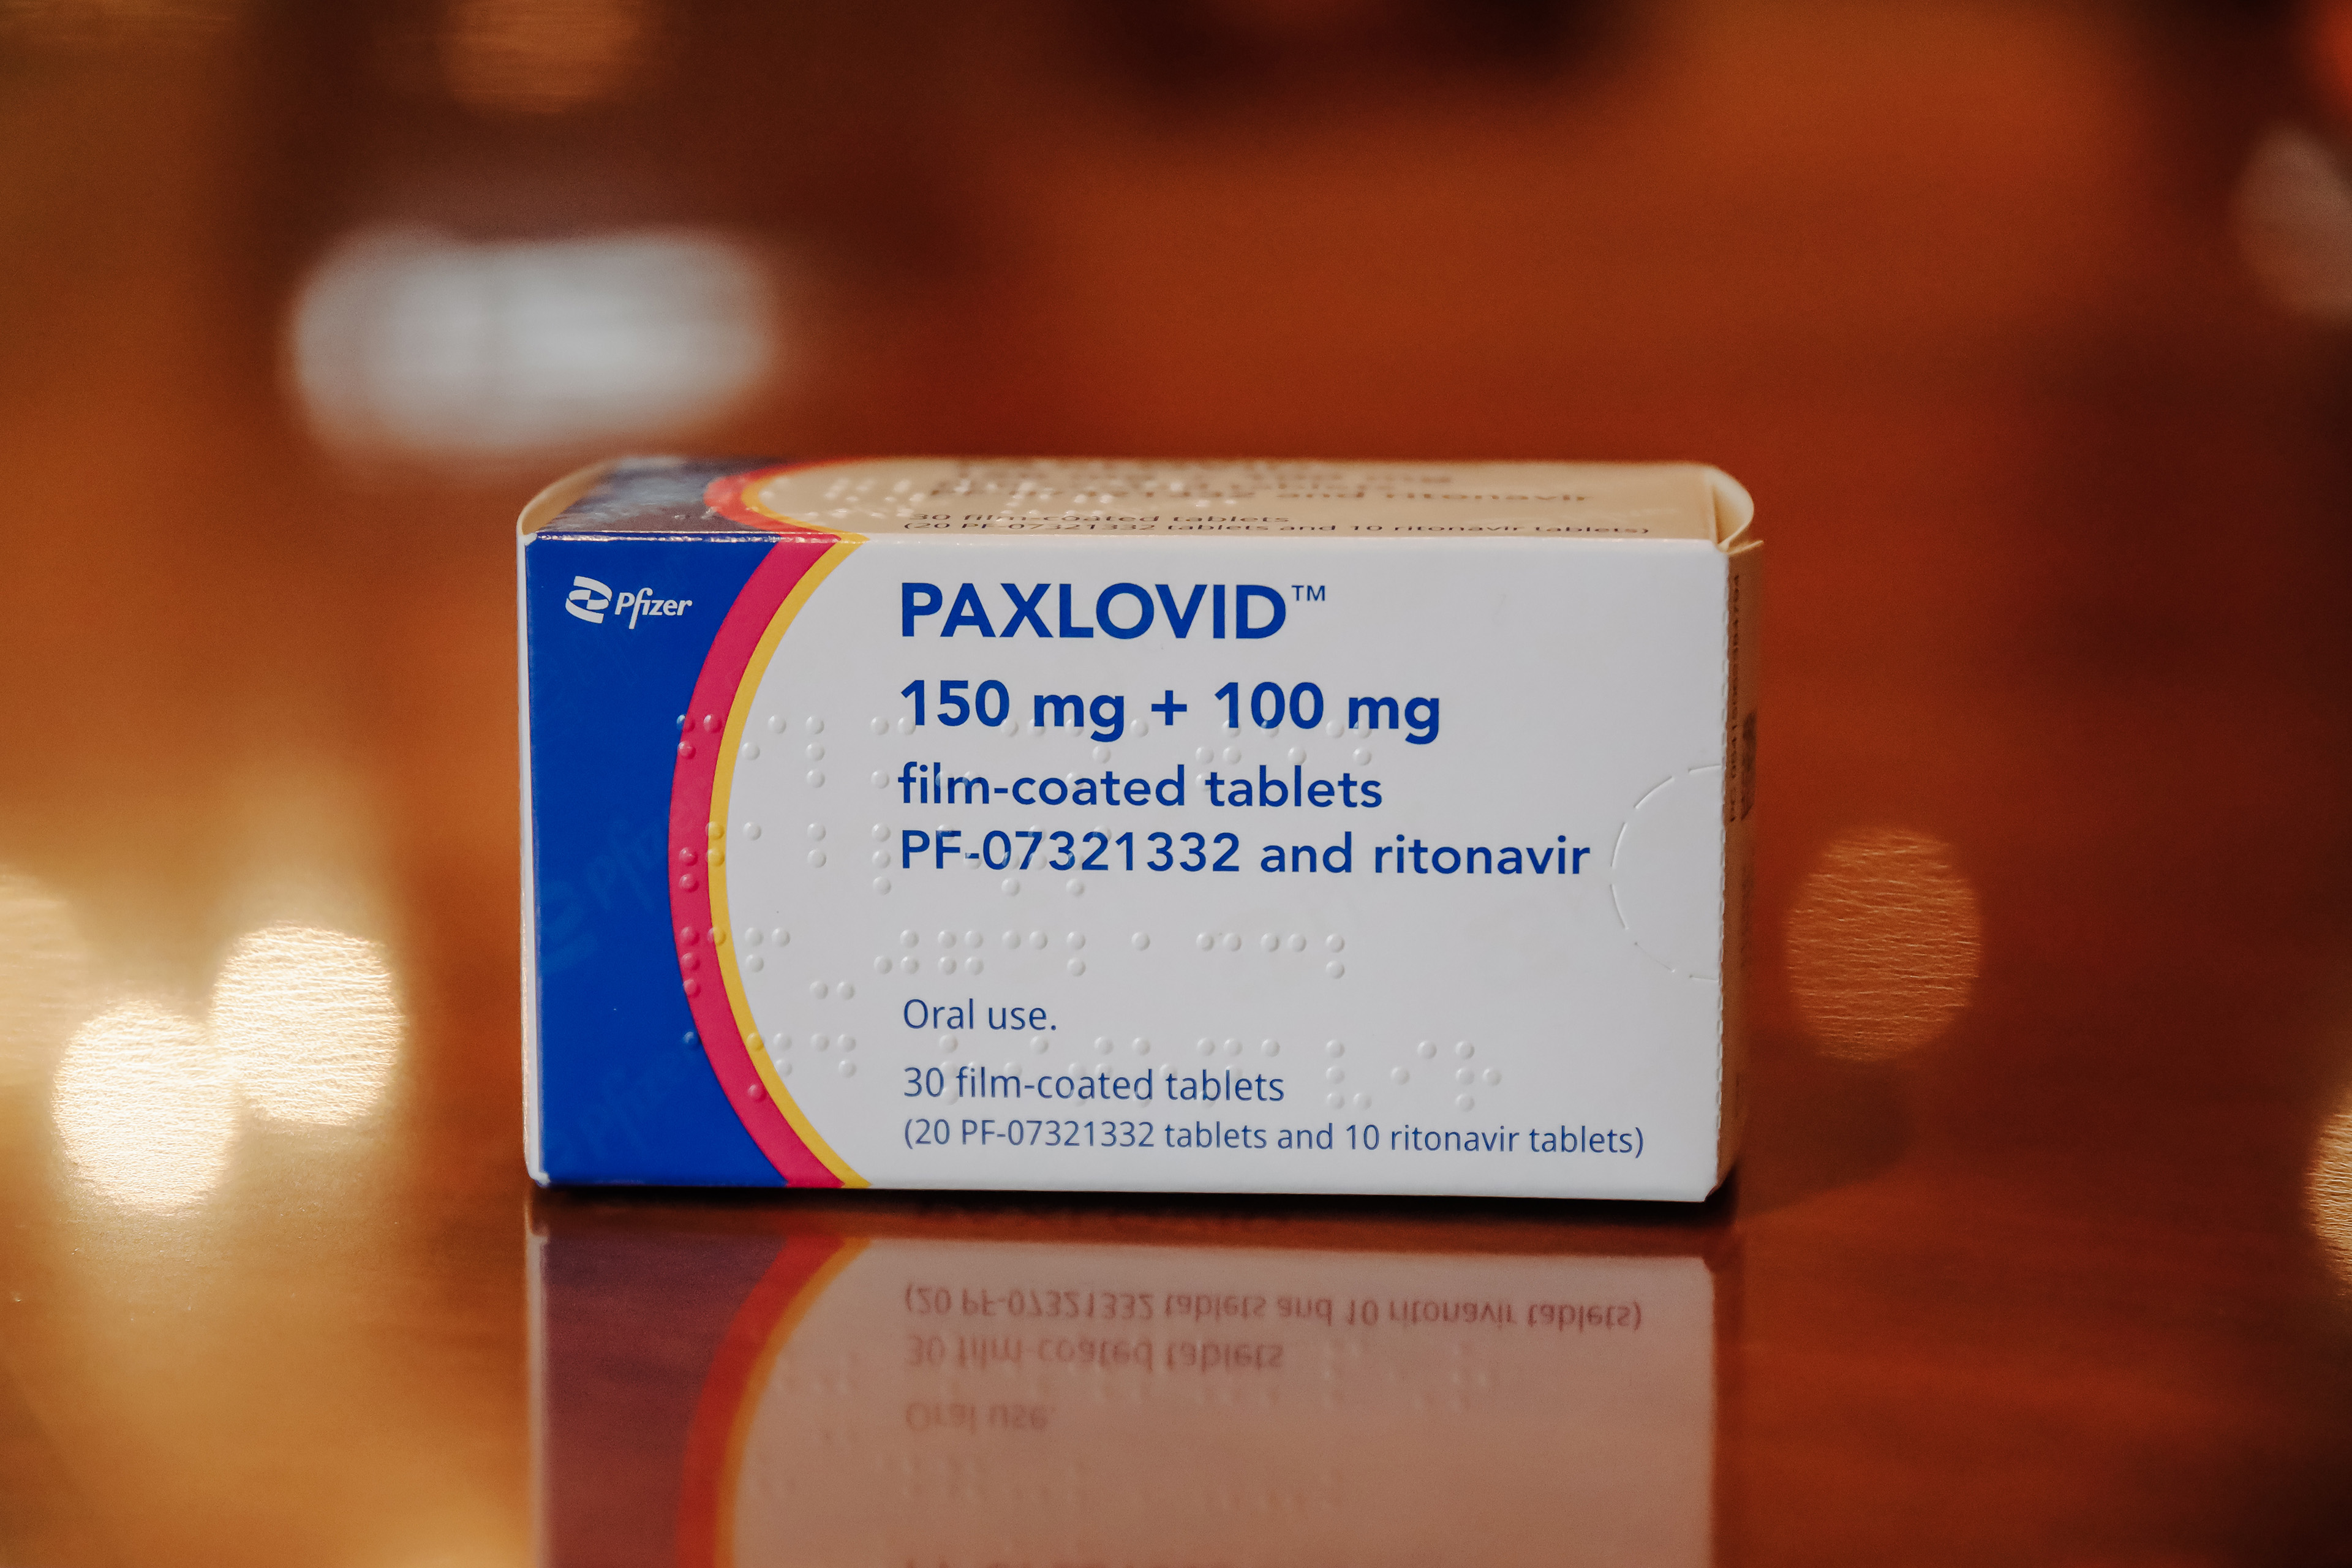 What Older Americans Need to Know About Taking Paxlovid